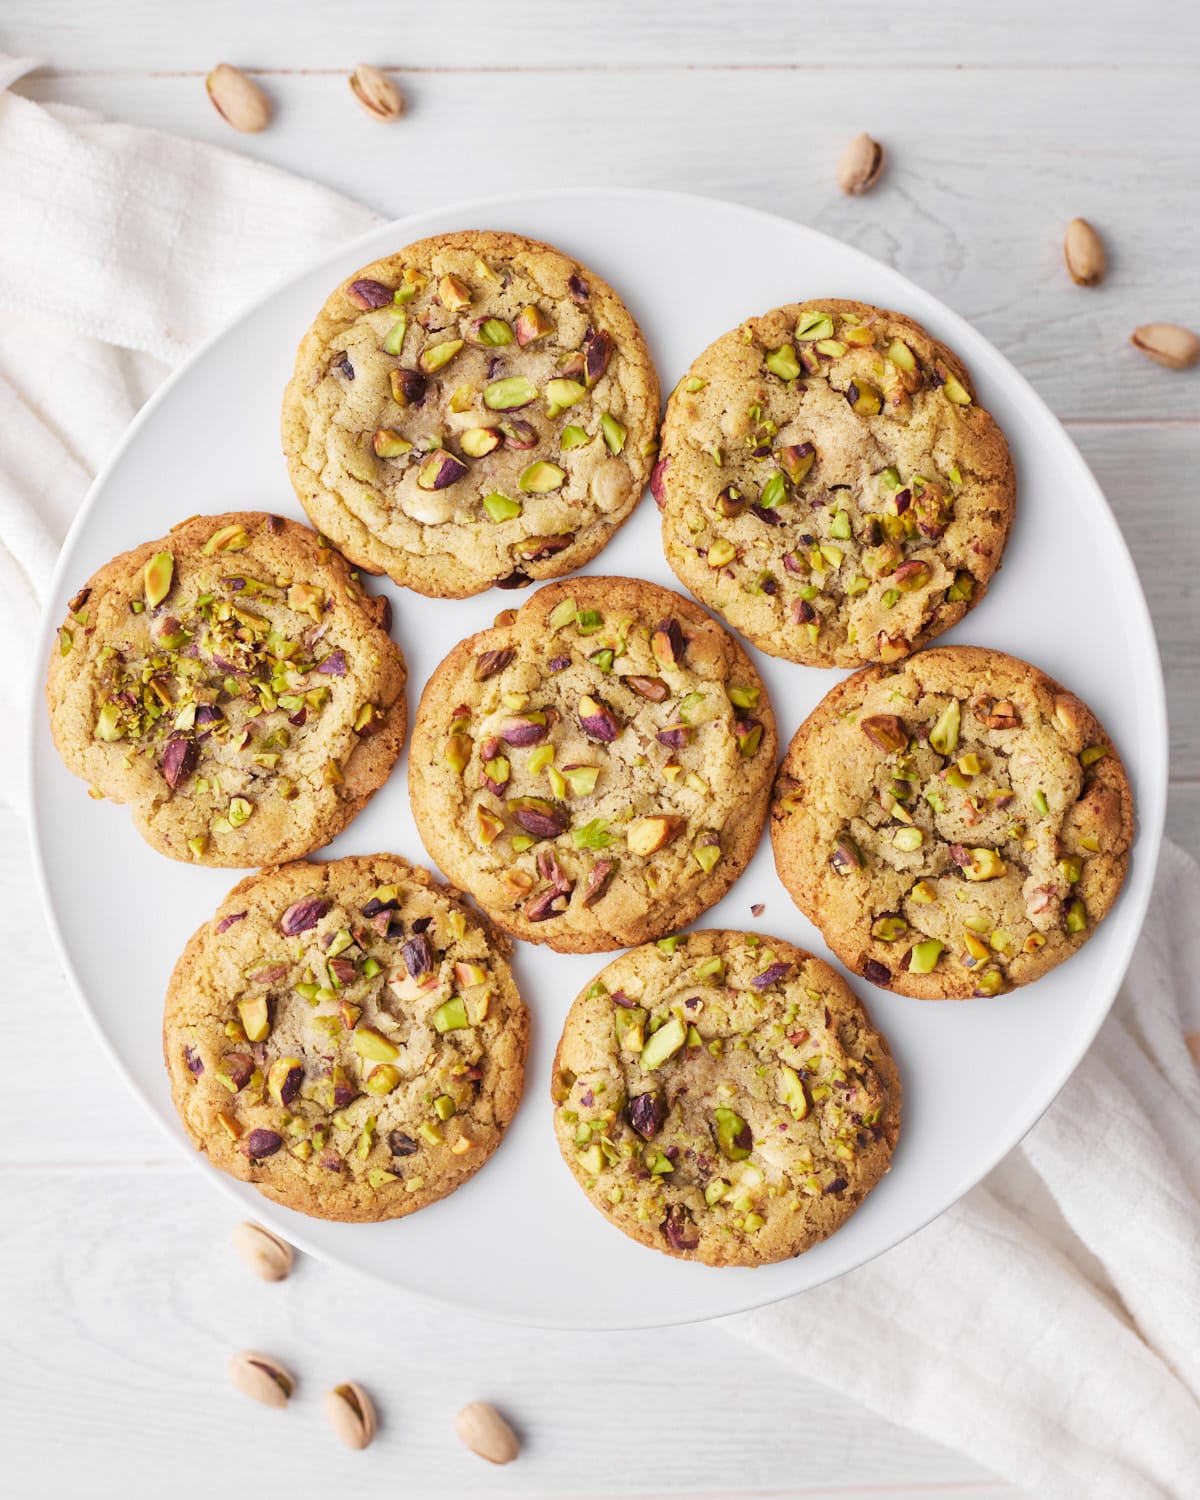 pistachio cookies from above, lying flat on a plate.